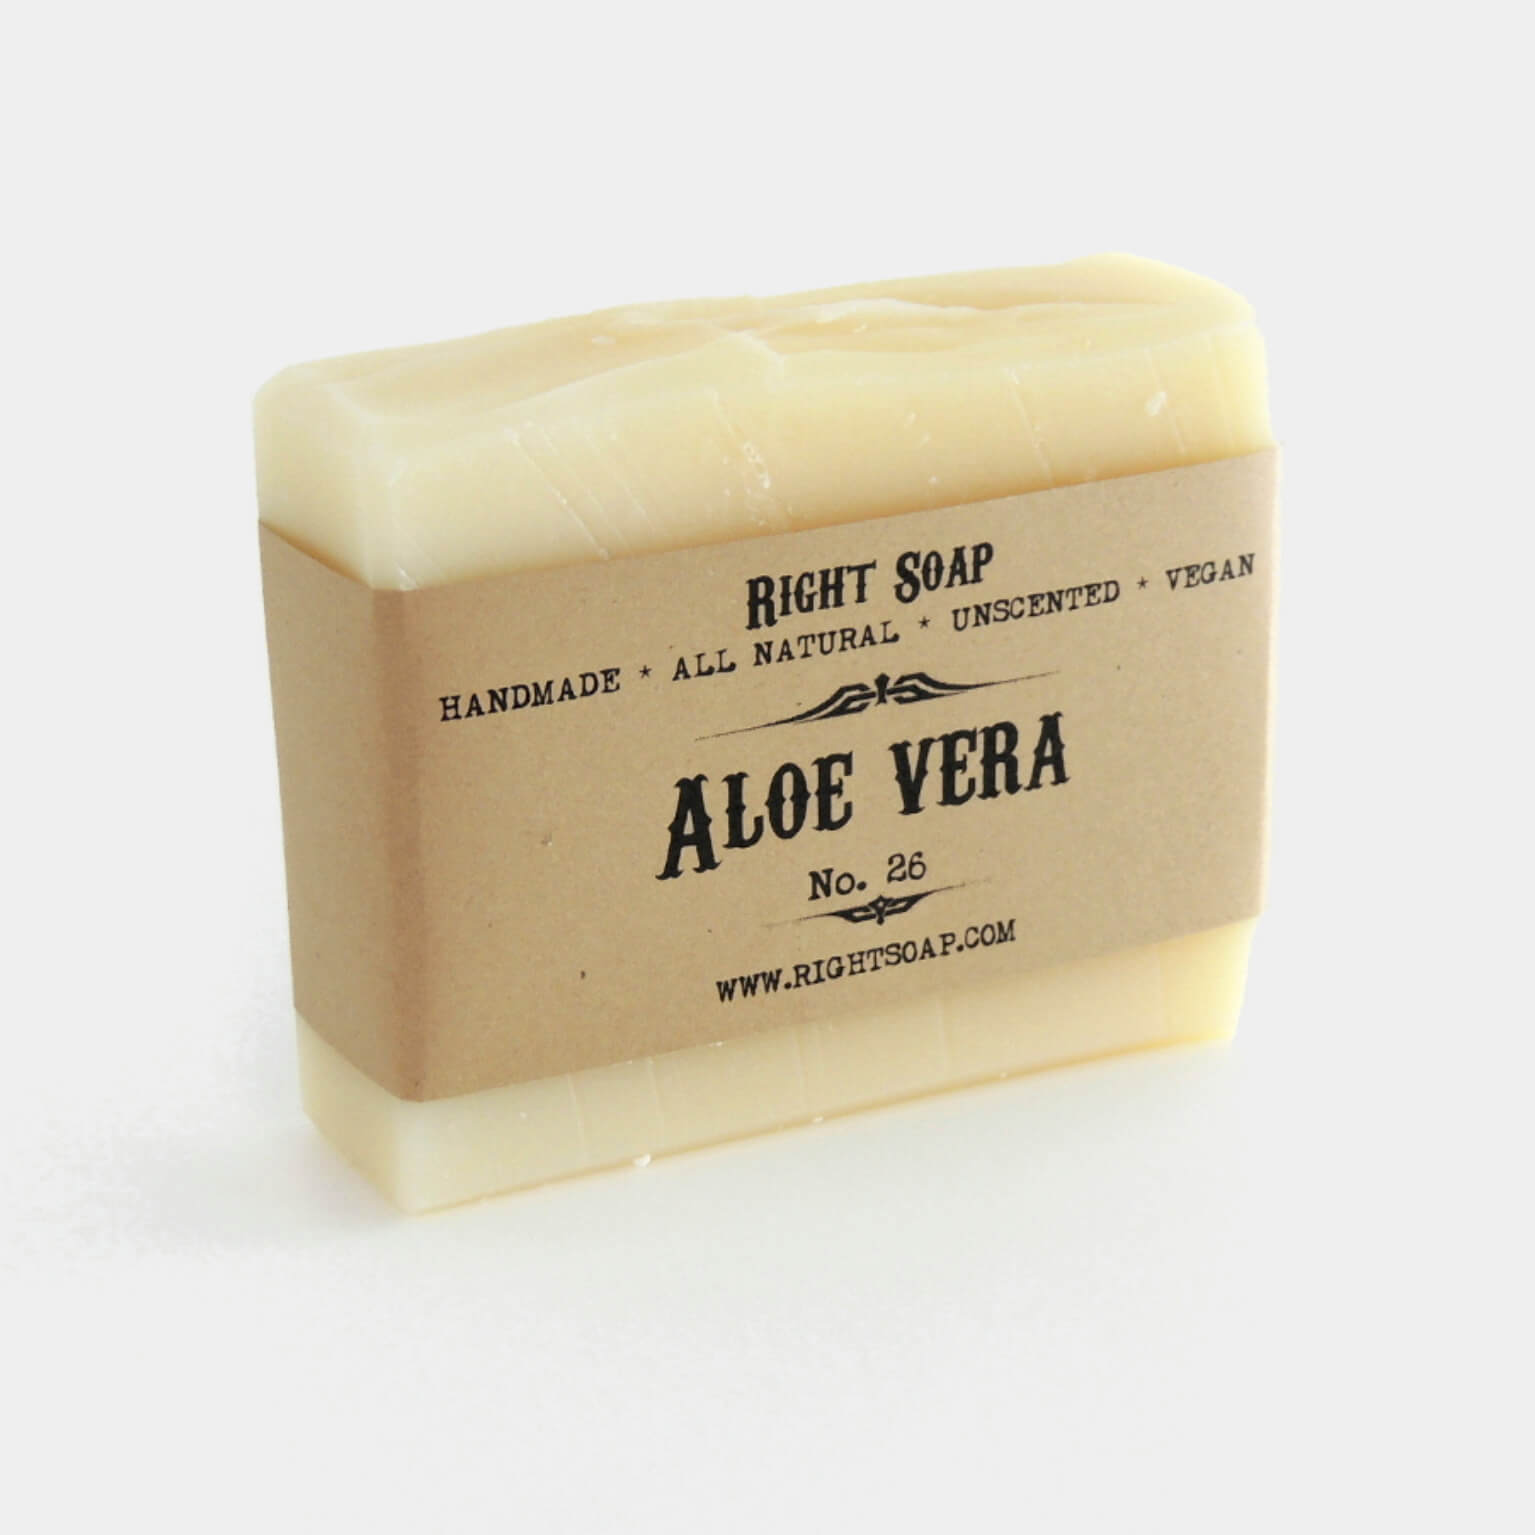 https://www.rightsoap.com/wp-content/uploads/2018/09/Aloe-Vera-Natural-Soap-Bar-Vegan-Unscented-Soap-for-Sensitive-Oily-and-Troubled-Skin-Face-and-Body-Soap-Shop-Best-Handmade-Soap-by-Right-Soap.jpg